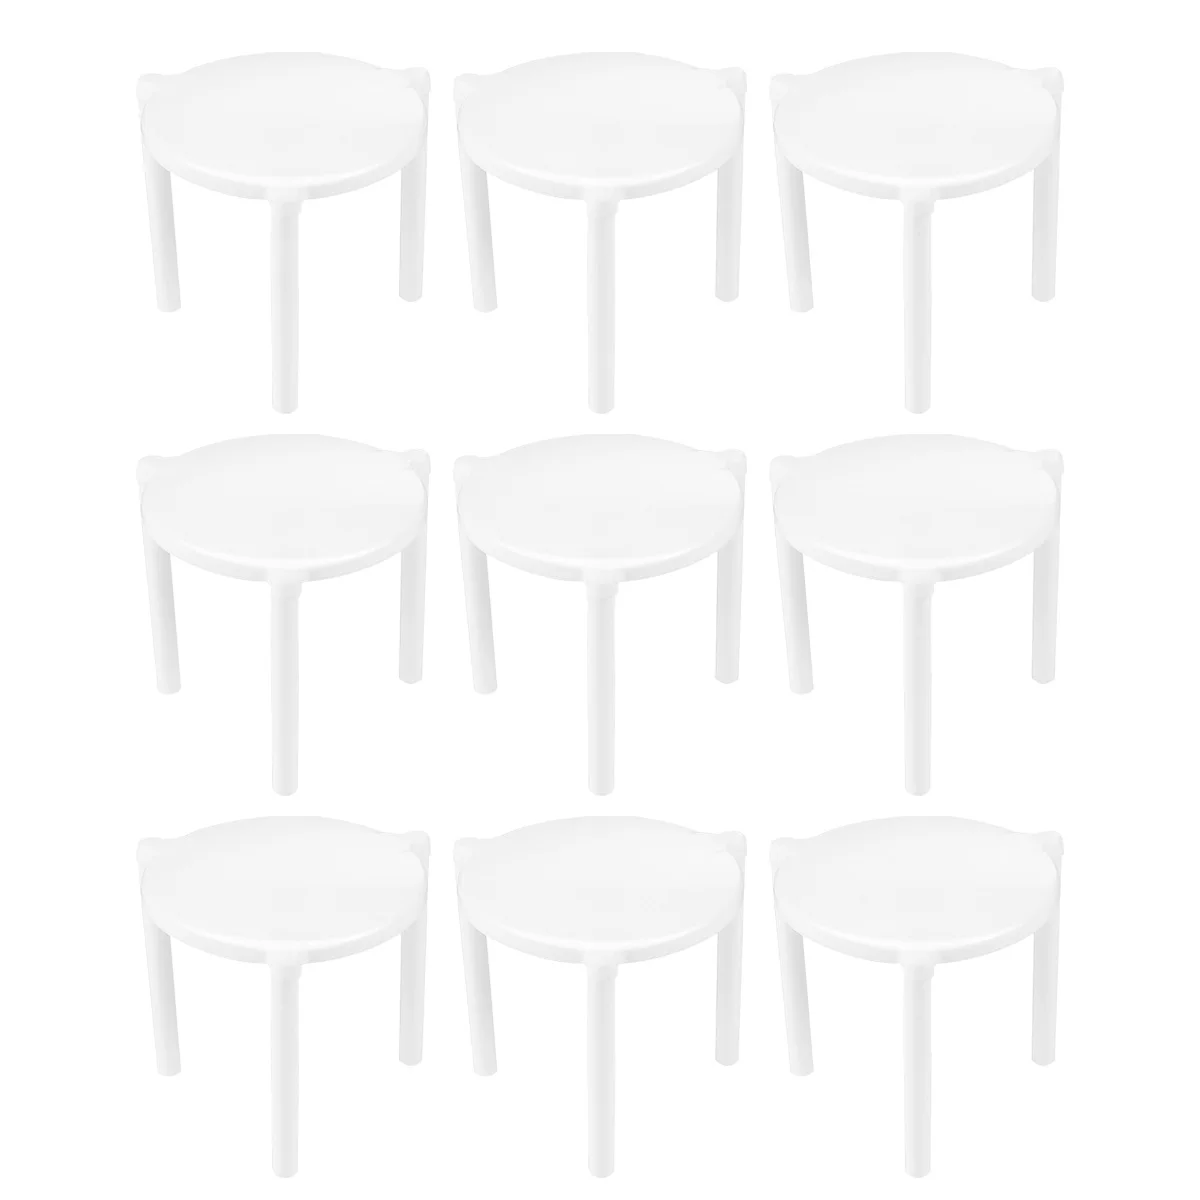 

Pizza Stand Saver Tripod Box Stack Plastic Support Stands Tabletop Table Takeout Takeaway Frame Tray Tables Pie Boxes White